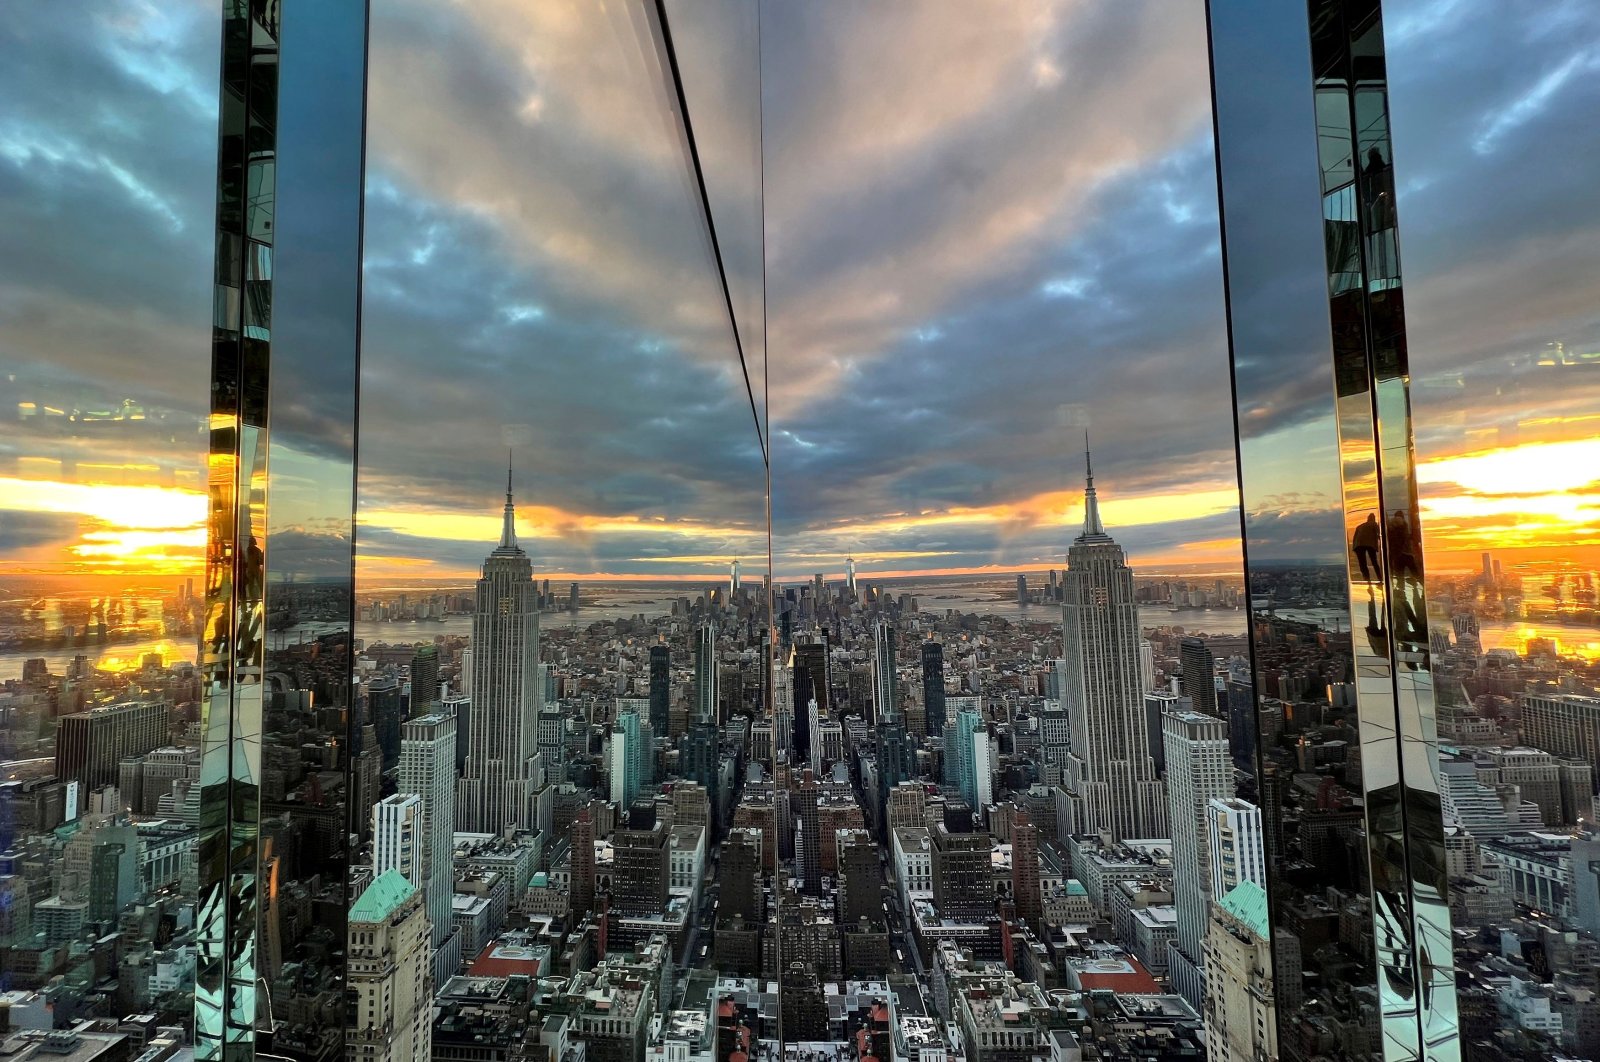 The Empire State Building and New York’s skyline are seen during the preview of SUMMIT One Vanderbilt observation deck, which is spread across the top four floors of the new One Vanderbilt tower in Midtown Manhattan, New York, U.S., Oct. 18, 2021. (Reuters Photo)